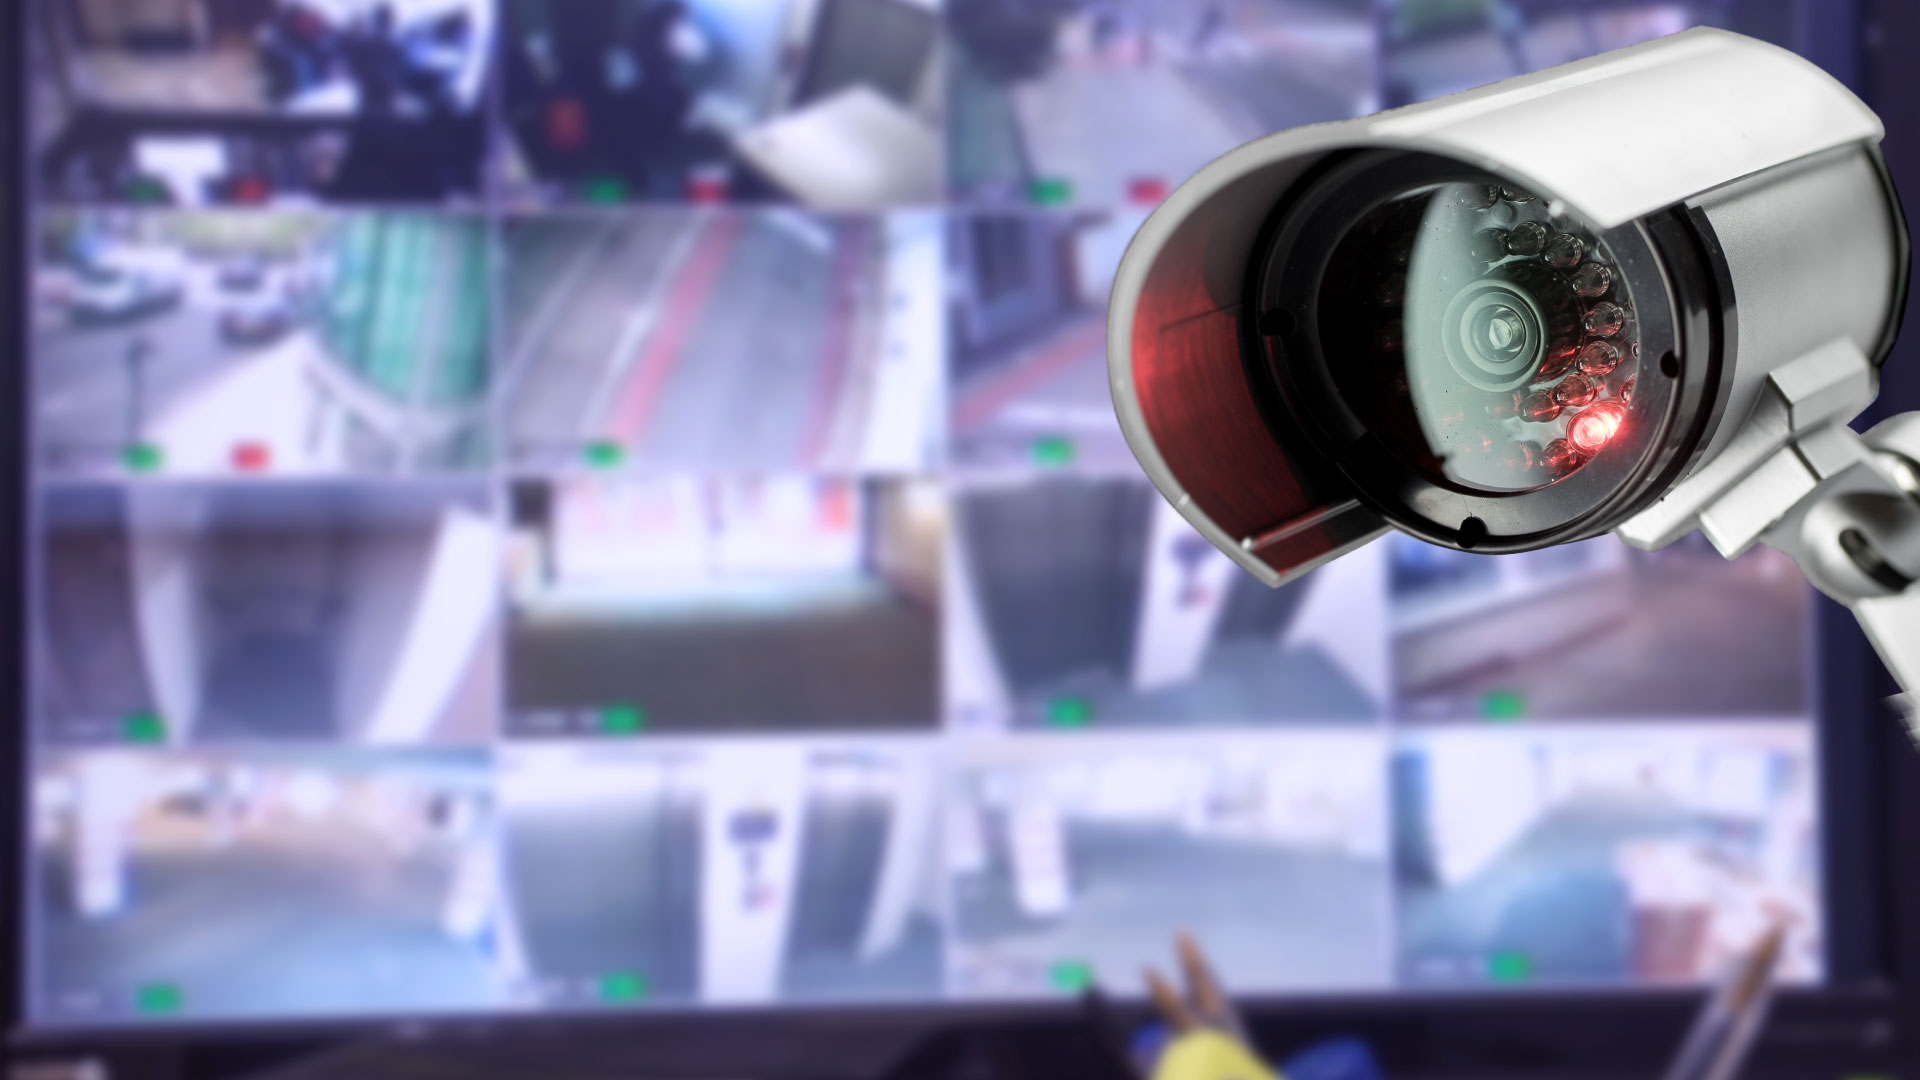 A CCTV camera in front of a monitors